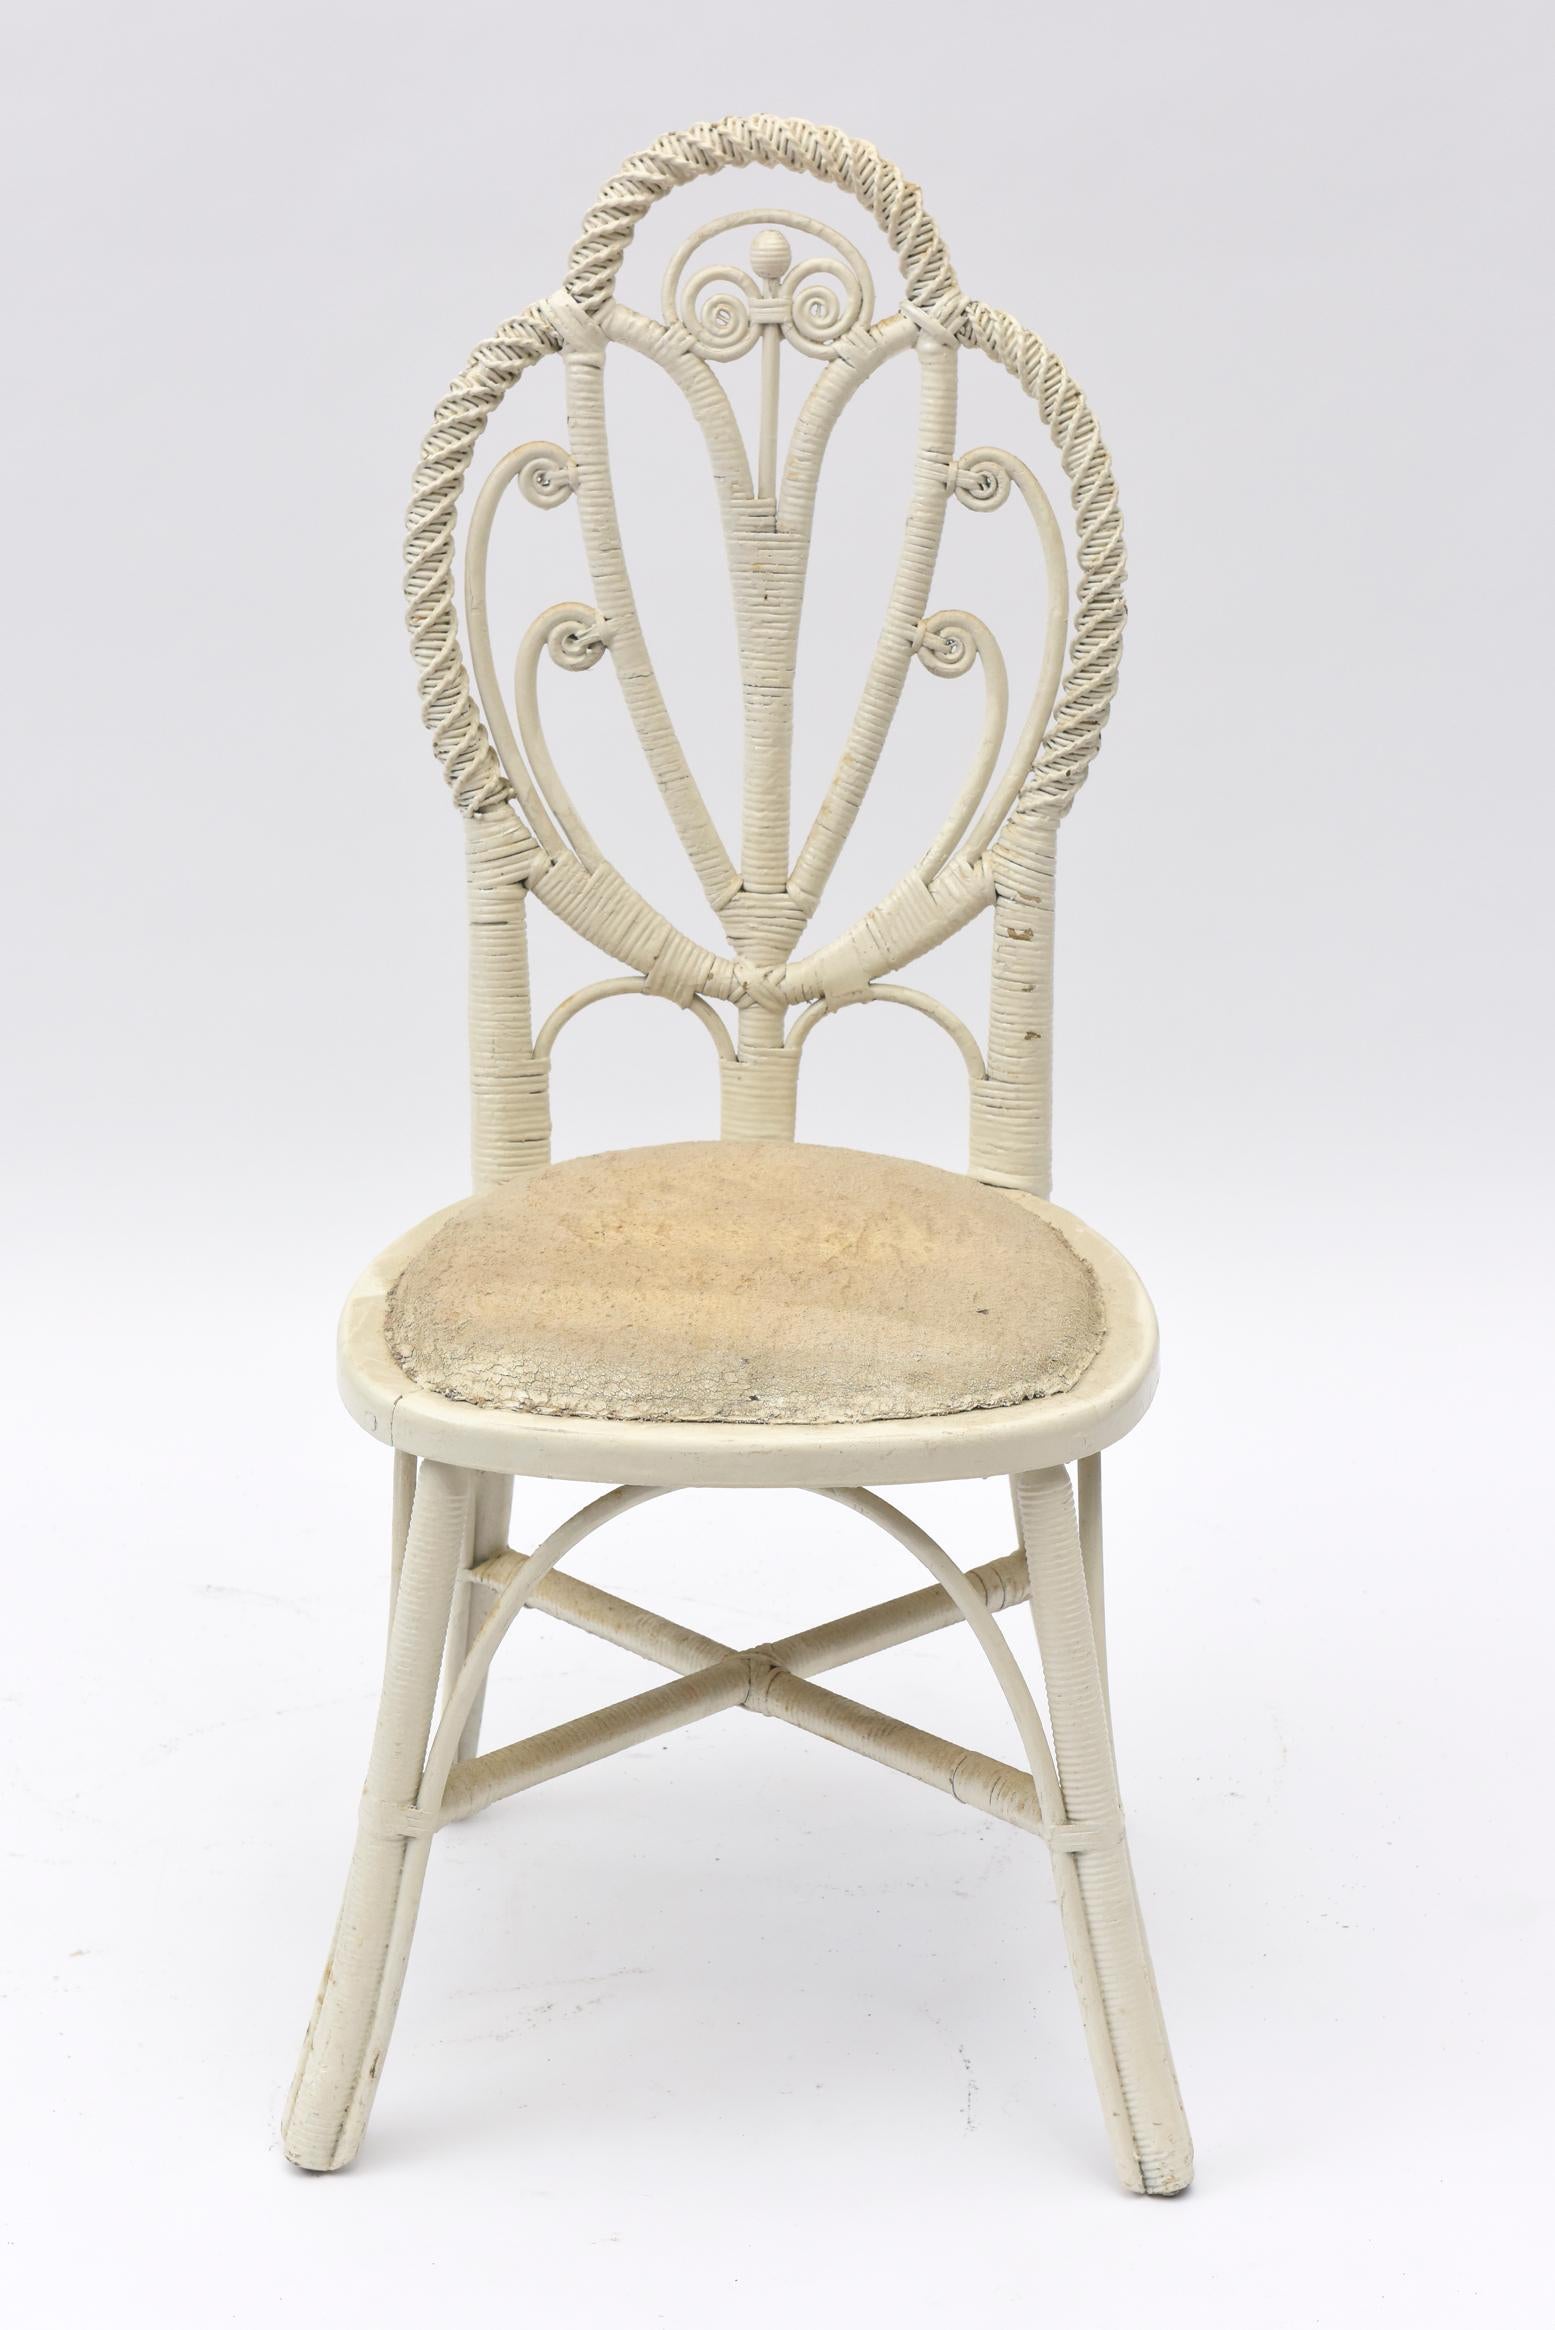 Late 19th century wicker chair has a 3 interlocking woven twisted inverted pear shapes to form its back. Inside the pears are curlicues topped with a single centre bead. It has simple legs and an upholstered cushion seat. It would be a sweet chair